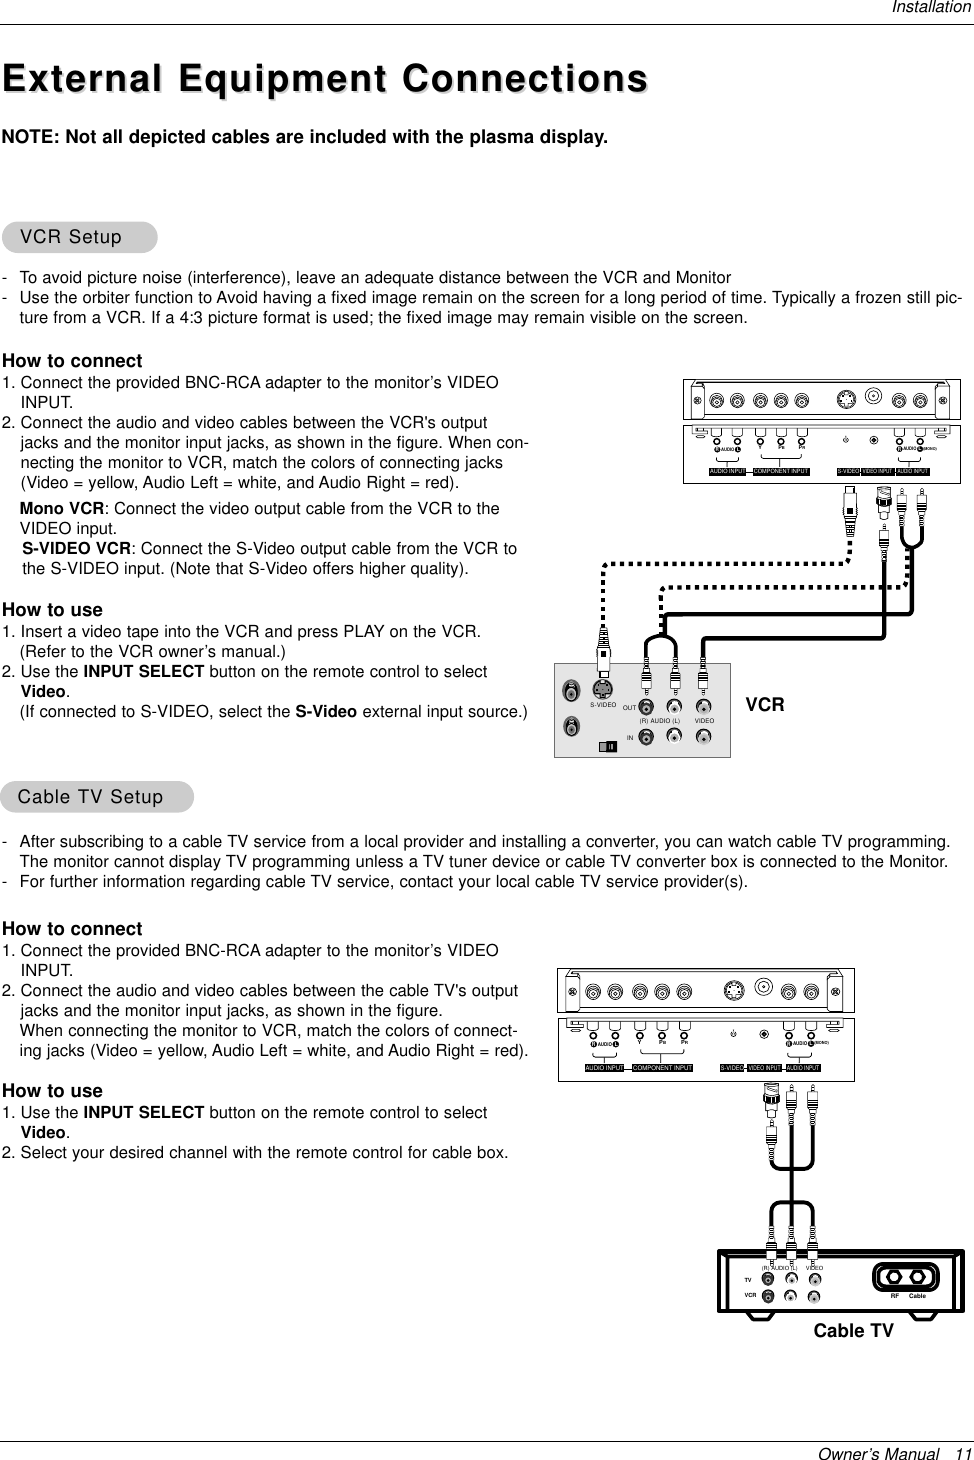 Owner’s Manual   11InstallationExternal Equipment ConnectionsExternal Equipment ConnectionsNOTE: Not all depicted cables are included with the plasma display.- To avoid picture noise (interference), leave an adequate distance between the VCR and Monitor- Use the orbiter function to Avoid having a fixed image remain on the screen for a long period of time. Typically a frozen still pic-ture from a VCR. If a 4:3 picture format is used; the fixed image may remain visible on the screen.How to connect1. Connect the provided BNC-RCA adapter to the monitor’s VIDEOINPUT.2. Connect the audio and video cables between the VCR&apos;s outputjacks and the monitor input jacks, as shown in the figure. When con-necting the monitor to VCR, match the colors of connecting jacks(Video = yellow, Audio Left = white, and Audio Right = red).Mono VCR: Connect the video output cable from the VCR to theVIDEO input.S-VIDEO VCR: Connect the S-Video output cable from the VCR tothe S-VIDEO input. (Note that S-Video offers higher quality).How to use1. Insert a video tape into the VCR and press PLAY on the VCR. (Refer to the VCR owner’s manual.) 2. Use the INPUT SELECT button on the remote control to selectVideo.(If connected to S-VIDEO, select the S-Video external input source.)VCR SetupVCR SetupS-VIDEO OUTIN(R) AUDIO (L) VIDEOYPBPR(MONO)RAUDIOLRAUDIOLS-VIDEOAUDIO INPUTVIDEO INPUTAUDIO INPUT COMPONENT INPUT- After subscribing to a cable TV service from a local provider and installing a converter, you can watch cable TV programming.The monitor cannot display TV programming unless a TV tuner device or cable TV converter box is connected to the Monitor.- For further information regarding cable TV service, contact your local cable TV service provider(s).How to connect1. Connect the provided BNC-RCA adapter to the monitor’s VIDEOINPUT.2. Connect the audio and video cables between the cable TV&apos;s outputjacks and the monitor input jacks, as shown in the figure. When connecting the monitor to VCR, match the colors of connect-ing jacks (Video = yellow, Audio Left = white, and Audio Right = red).How to use1. Use the INPUT SELECT button on the remote control to selectVideo.2. Select your desired channel with the remote control for cable box.Cable Cable TV SetupTV SetupTVVCR RF Cable (R) AUDIO (L) VIDEOYPBPR(MONO)RAUDIOLRAUDIOLS-VIDEOAUDIO INPUTVIDEO INPUTAUDIO INPUTCOMPONENT INPUTVCRCable TV